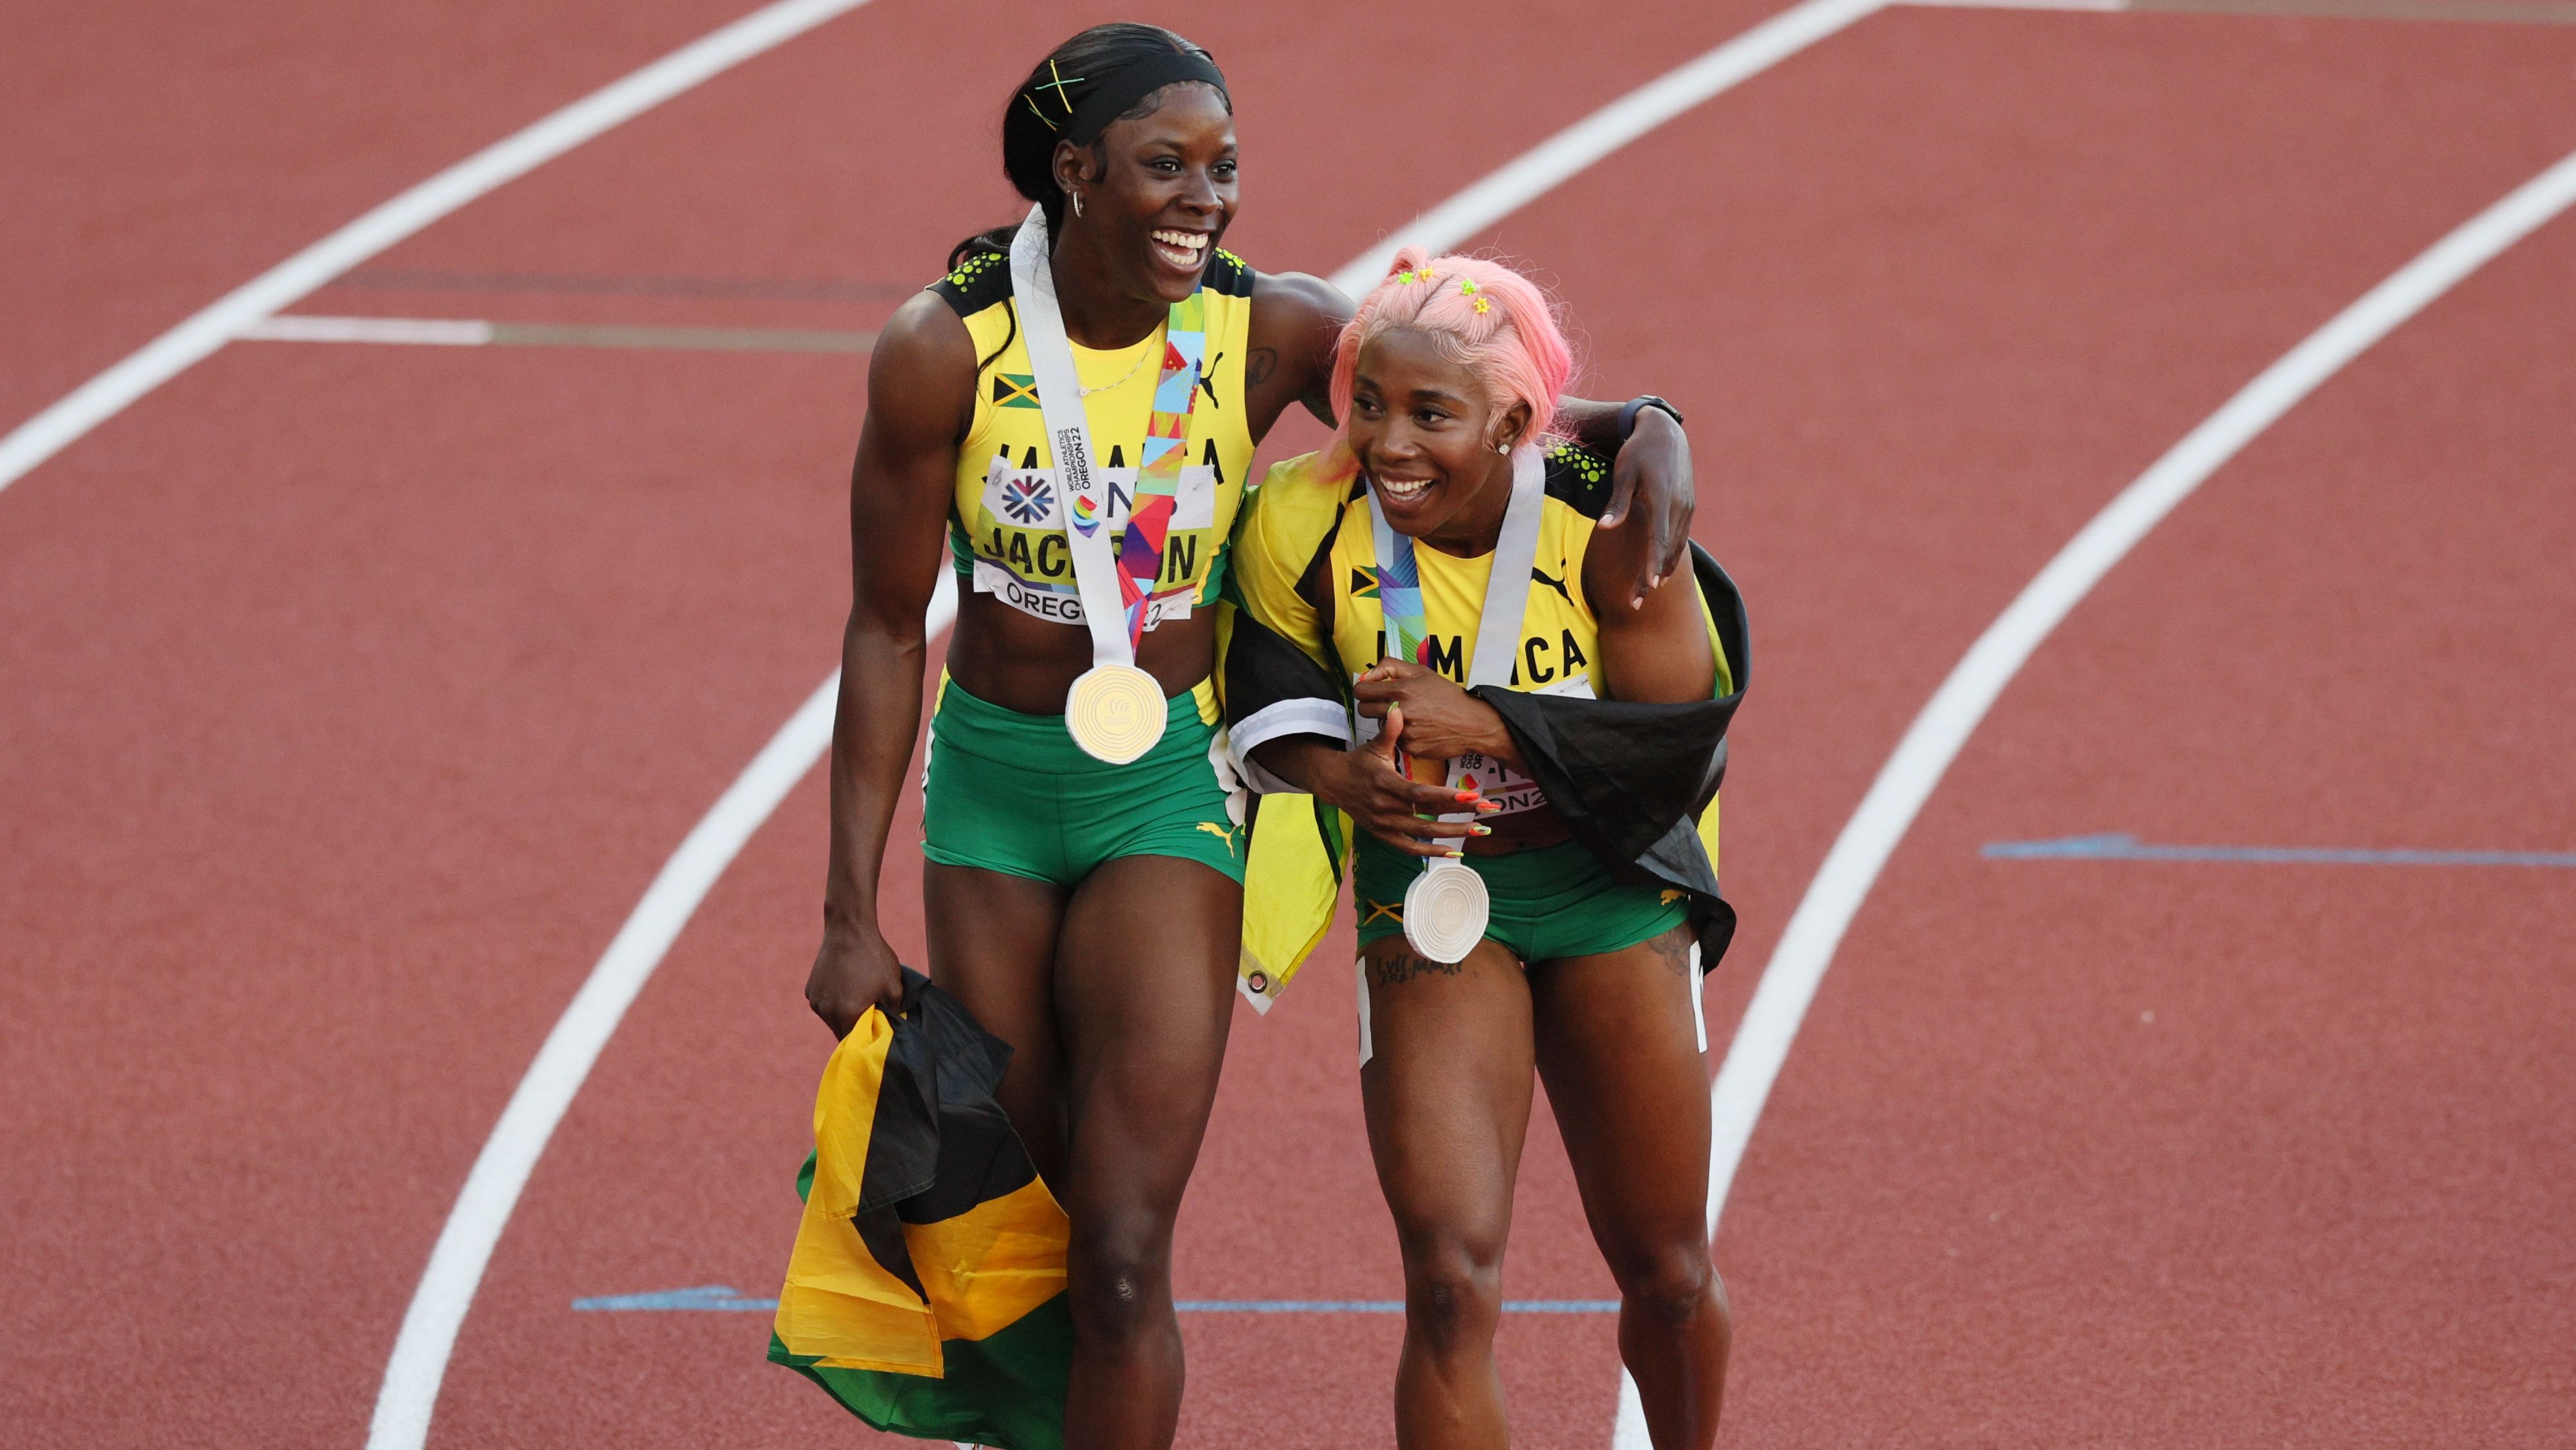 Gold medalist Shericka Jackson and silver medalist Shelly-Ann Fraser-Pryce celebrate after the women's 200m in Oregon, US. 